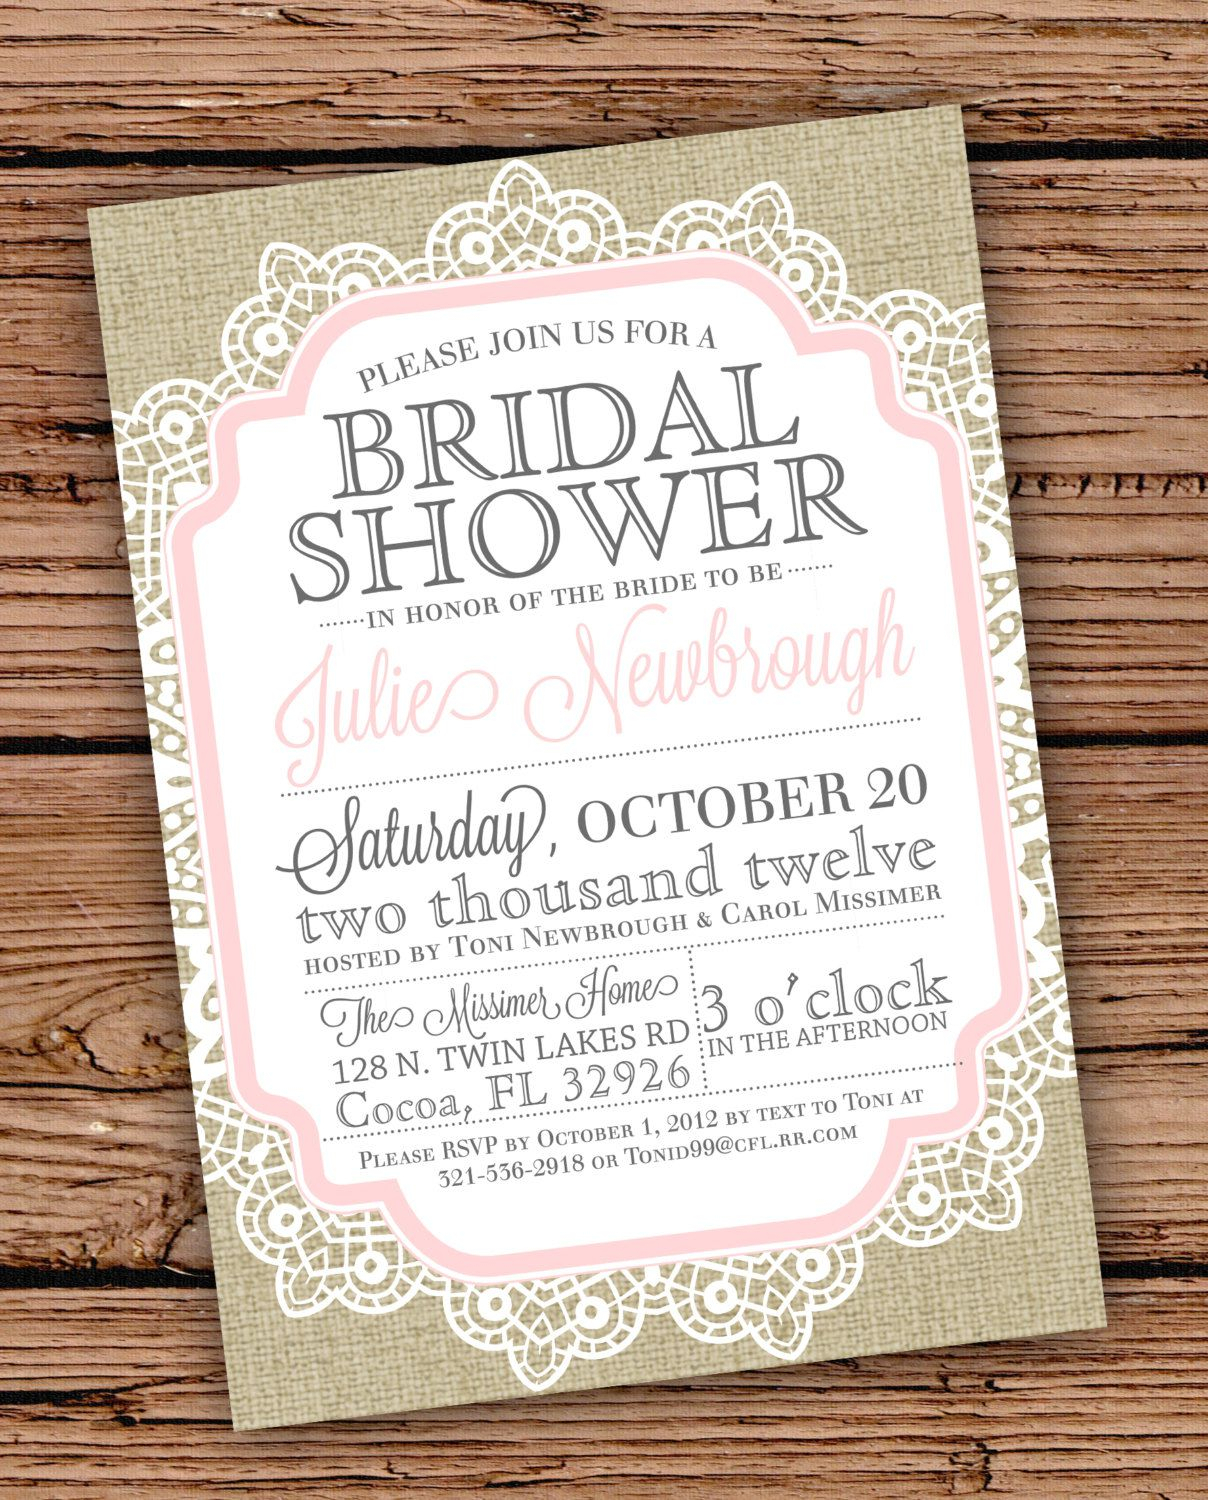 Diy Wedding Shower Invitations : Diy Bridal Shower With Regard To Michaels Place Card Template